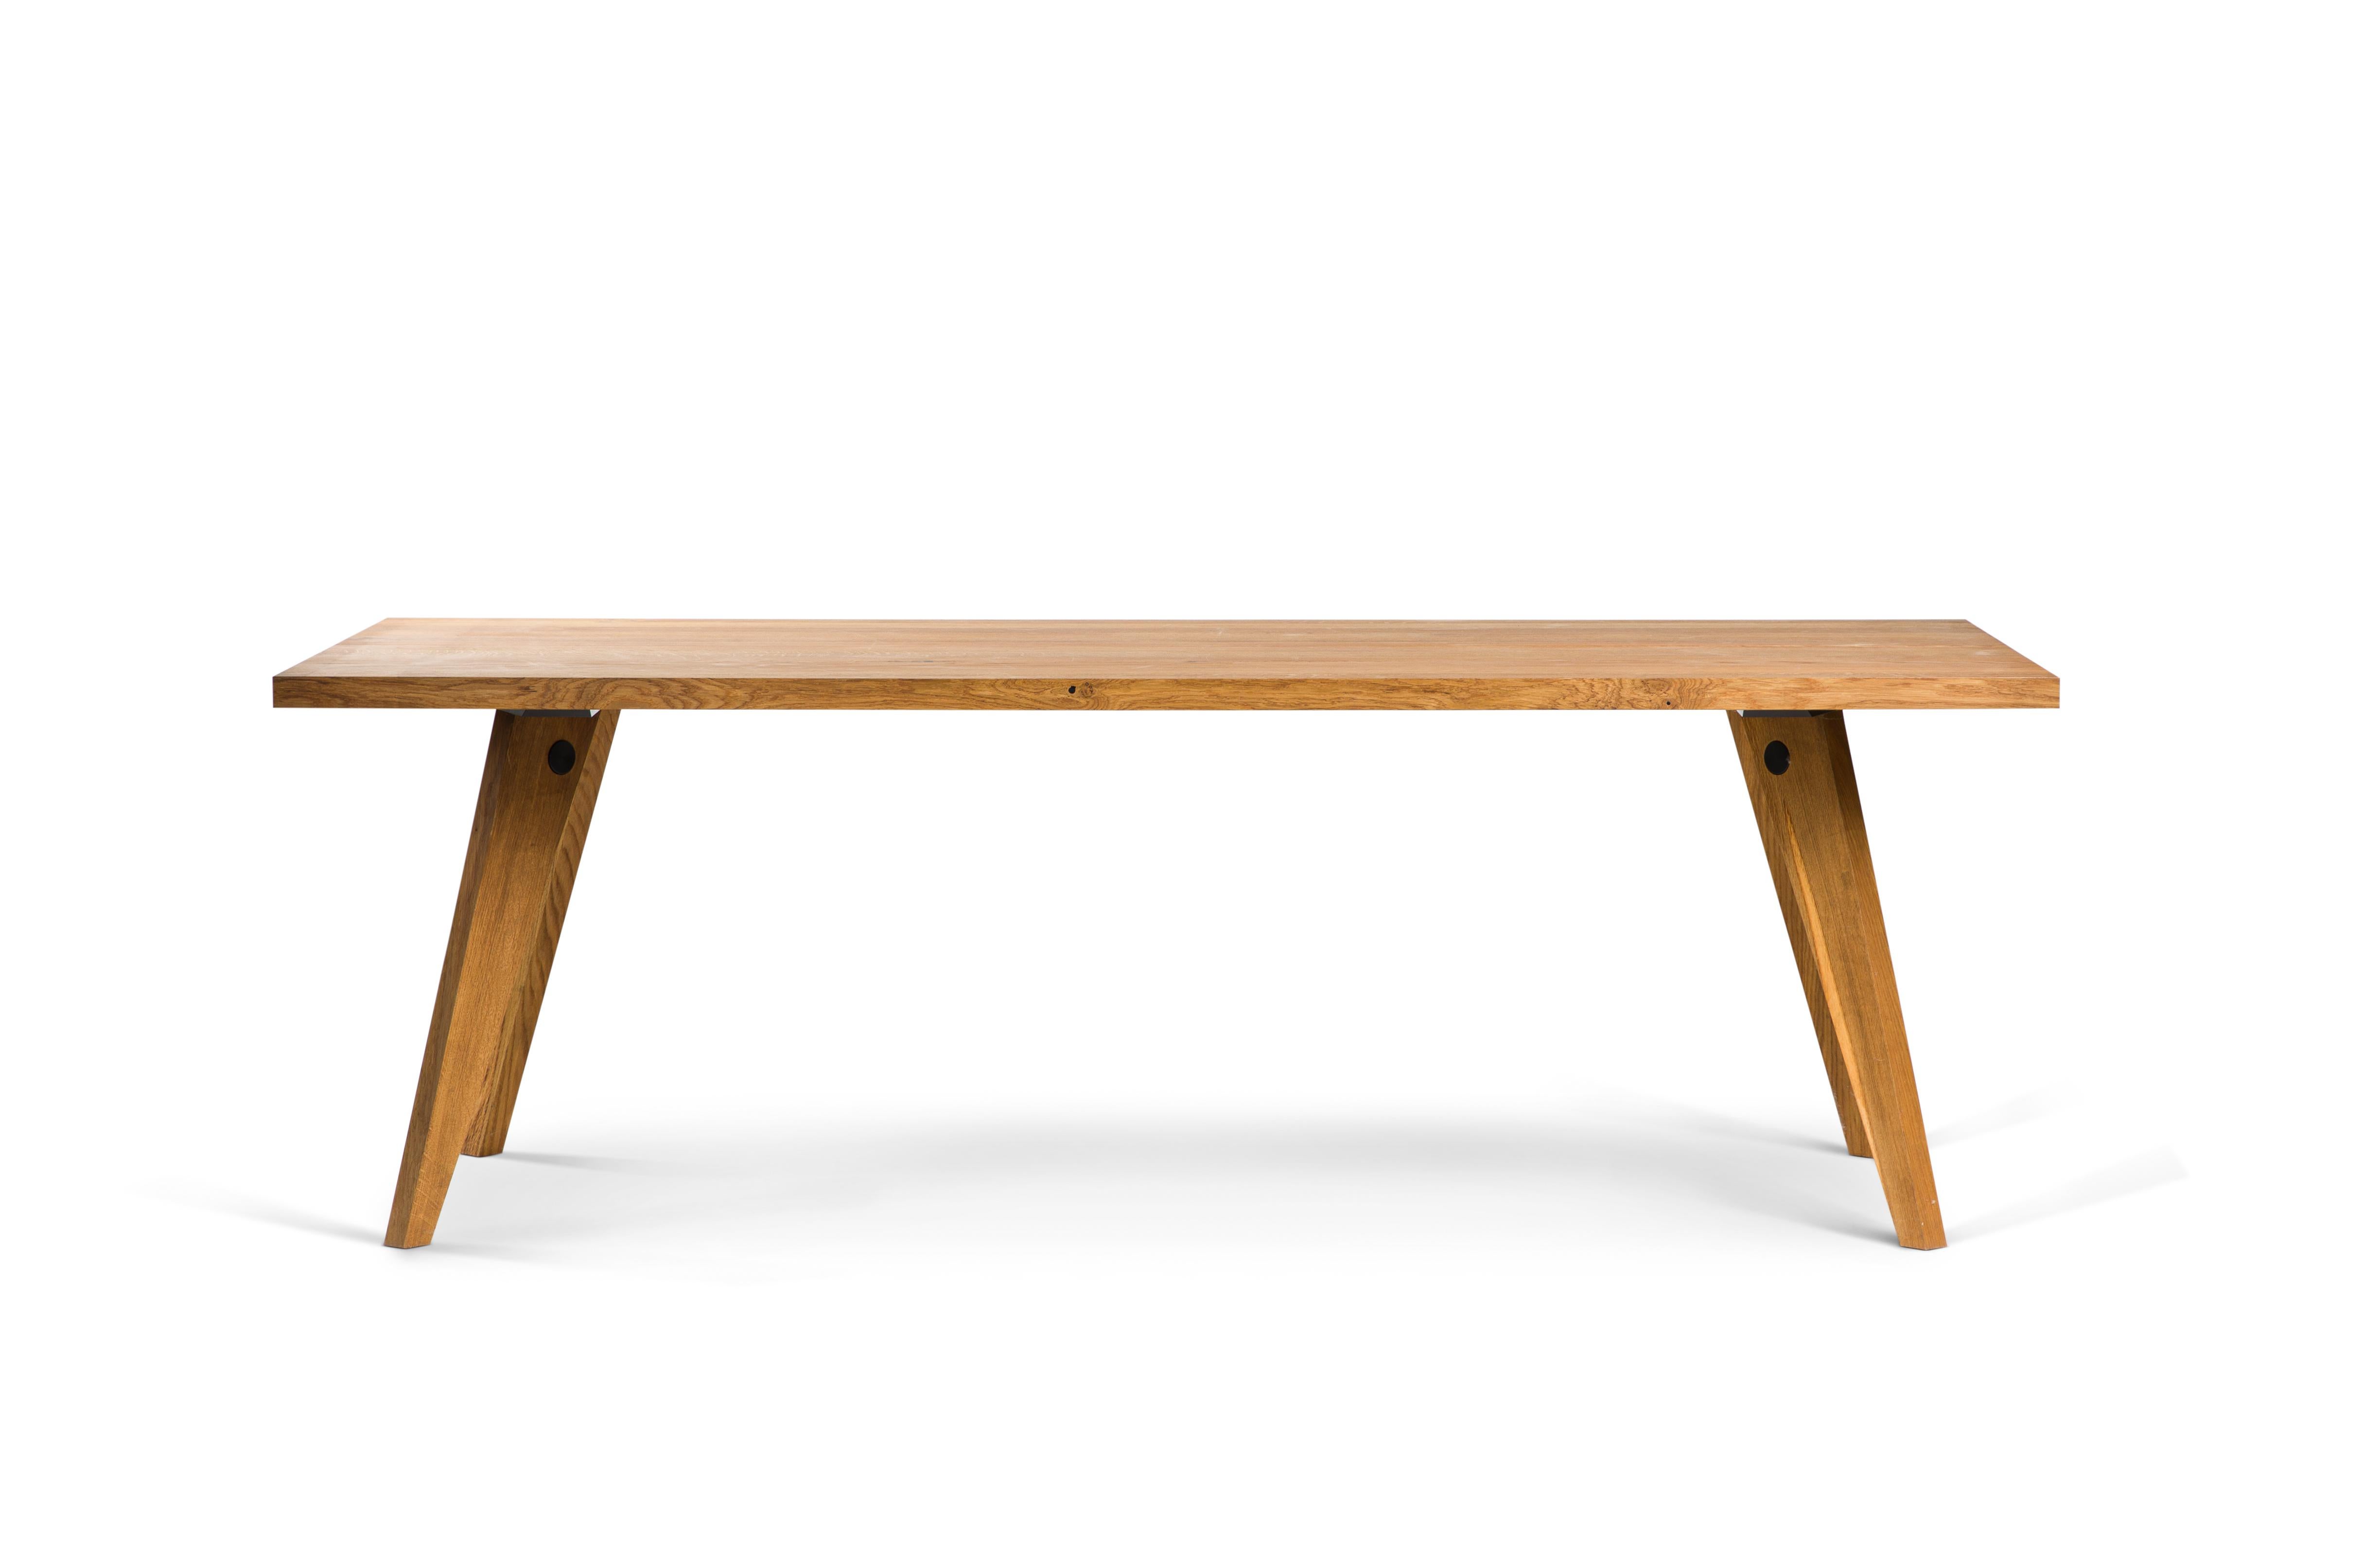 Plank table, solid oiled Danish oak. 
Heavy duty quality: two solid planks (40 mm thick) with a nice little gap in between.
Mounted on Jean Prouve-inspired base. 
The tabletop and the base can be detached from each other. Measures: 100 x 190cm.